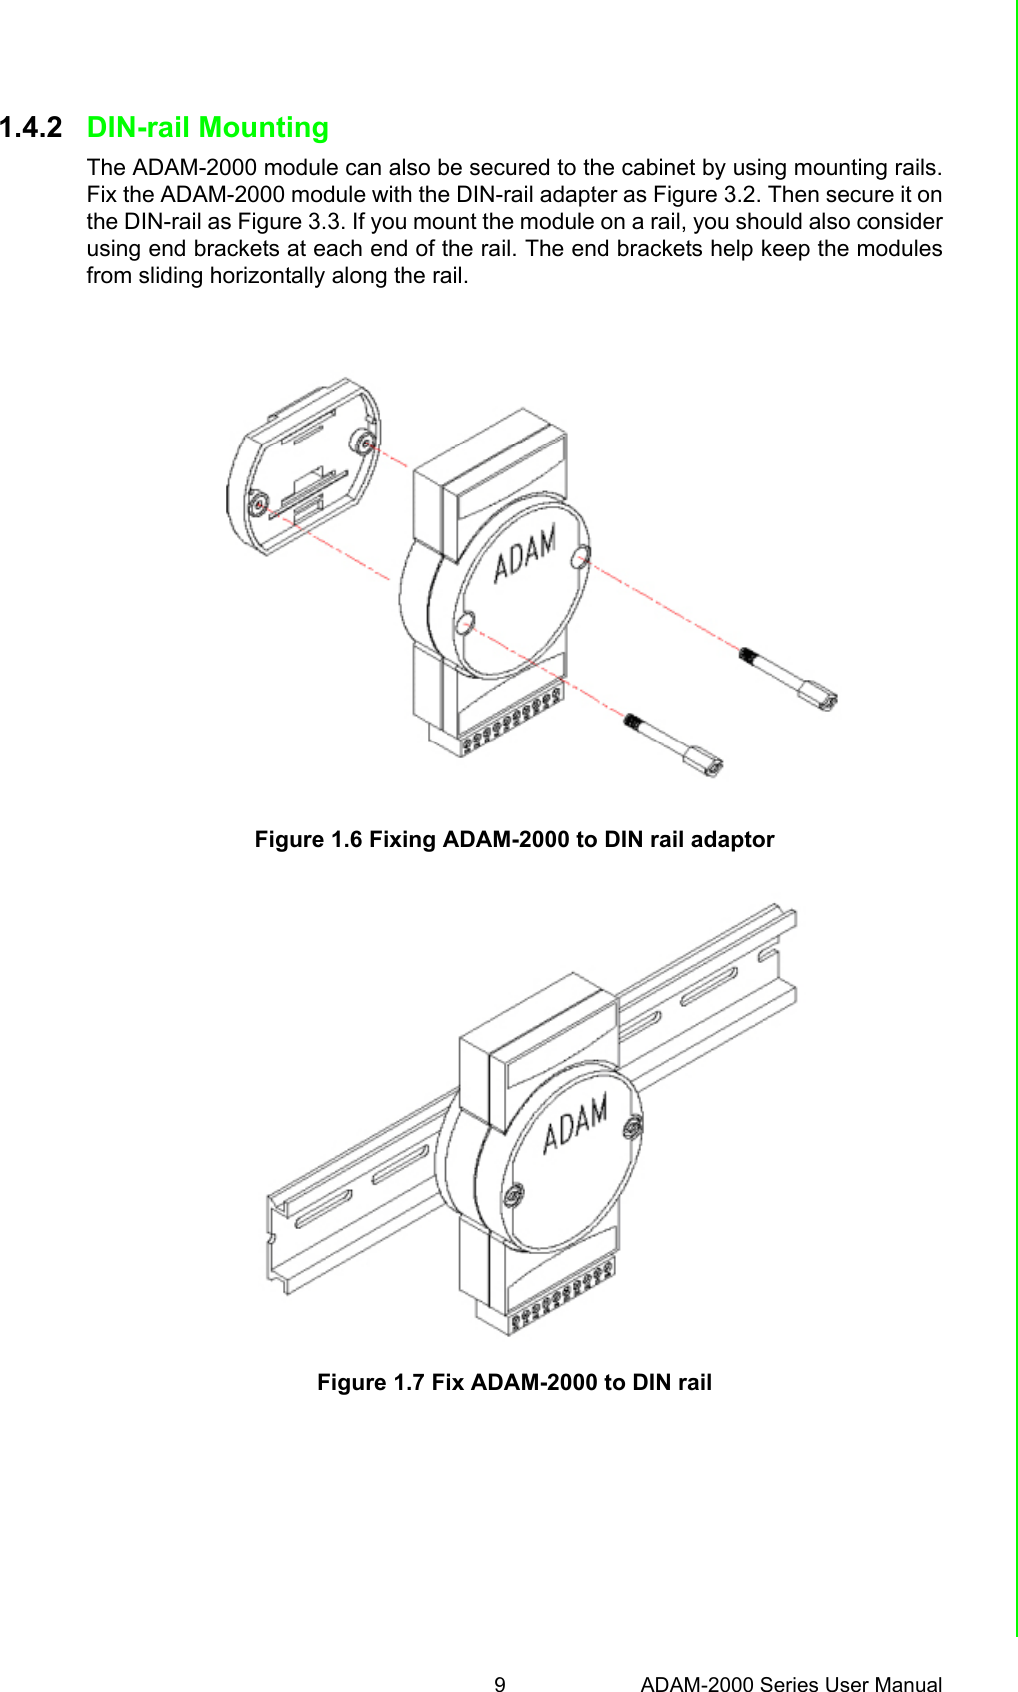 9 ADAM-2000 Series User ManualChapter 1 Understanding Your System1.4.2 DIN-rail MountingThe ADAM-2000 module can also be secured to the cabinet by using mounting rails.Fix the ADAM-2000 module with the DIN-rail adapter as Figure 3.2. Then secure it onthe DIN-rail as Figure 3.3. If you mount the module on a rail, you should also considerusing end brackets at each end of the rail. The end brackets help keep the modulesfrom sliding horizontally along the rail.Figure 1.6 Fixing ADAM-2000 to DIN rail adaptorFigure 1.7 Fix ADAM-2000 to DIN rail